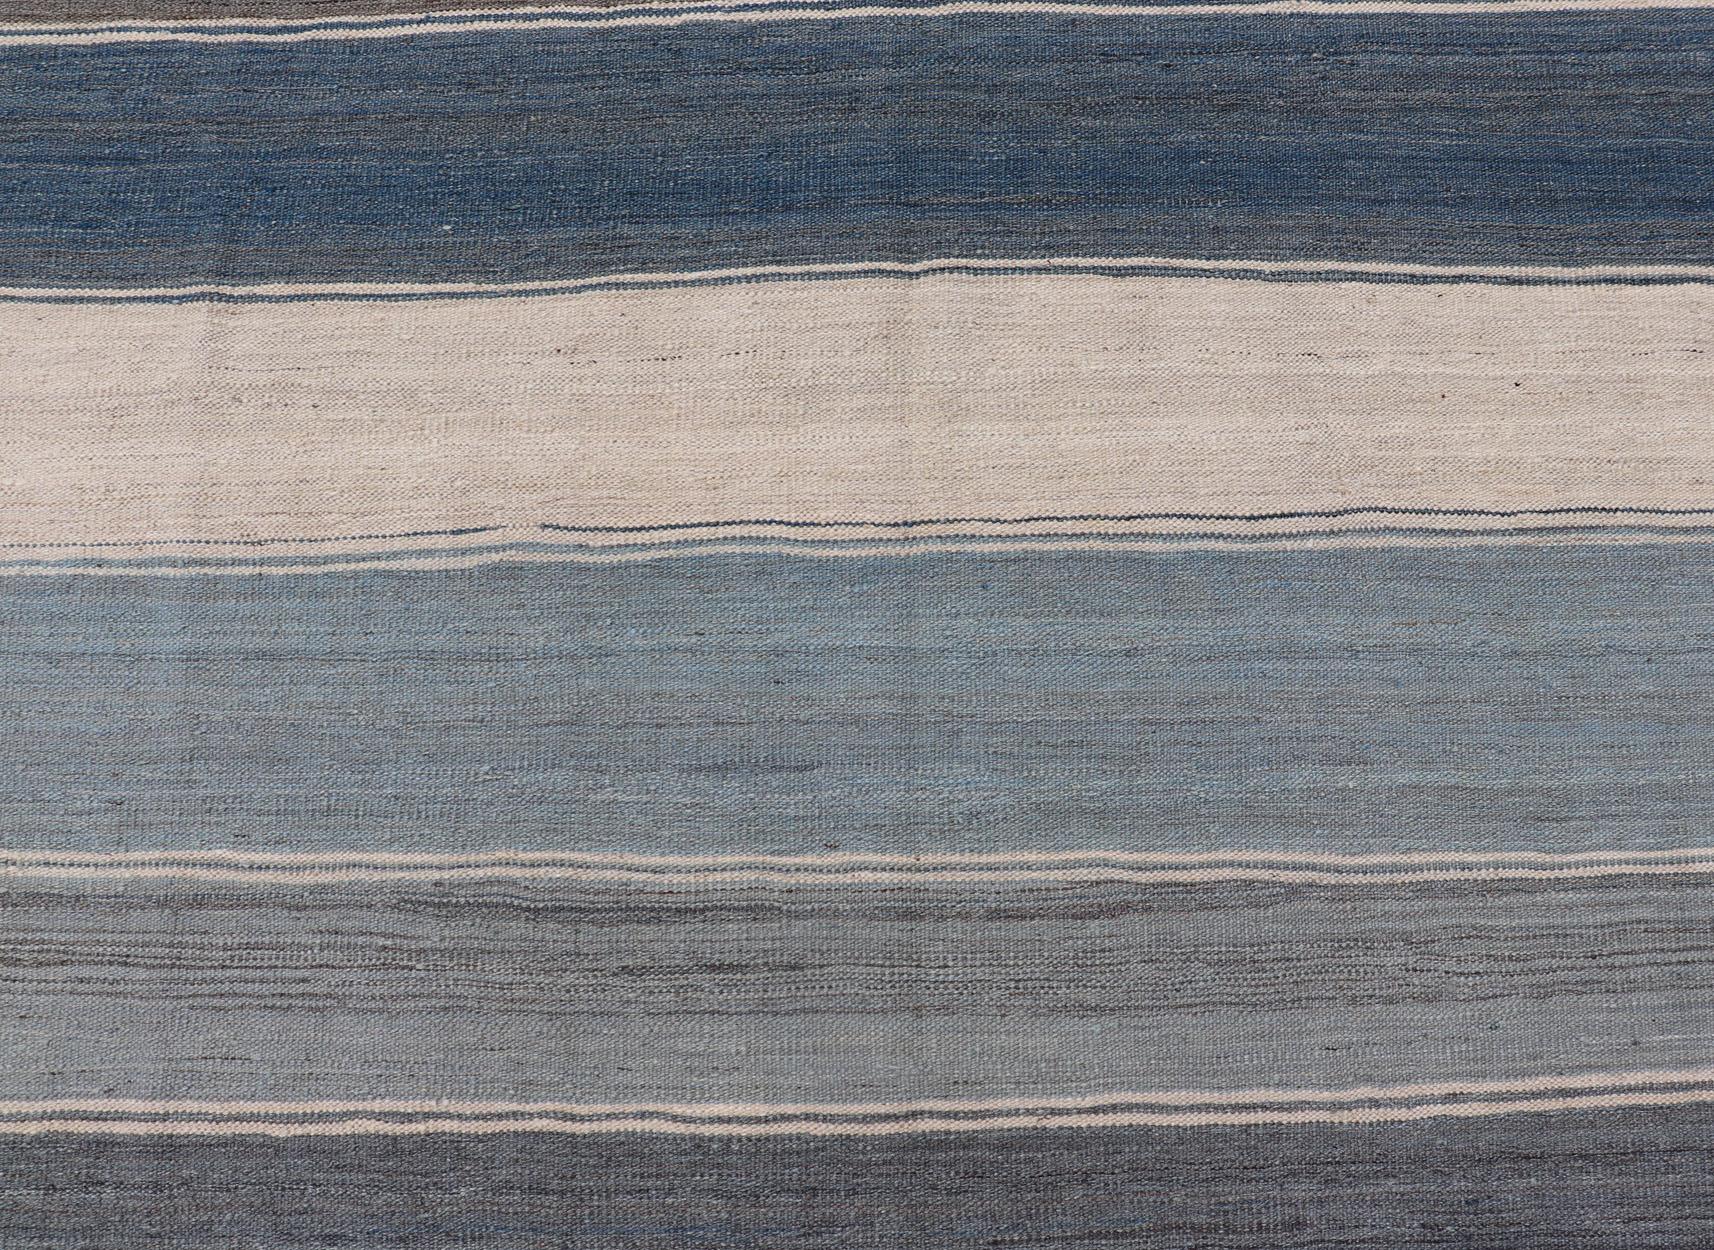 Contemporary Modern Kilim Rug in Shades of steel Blue, Teal, Brown, Light Gray and Cream For Sale